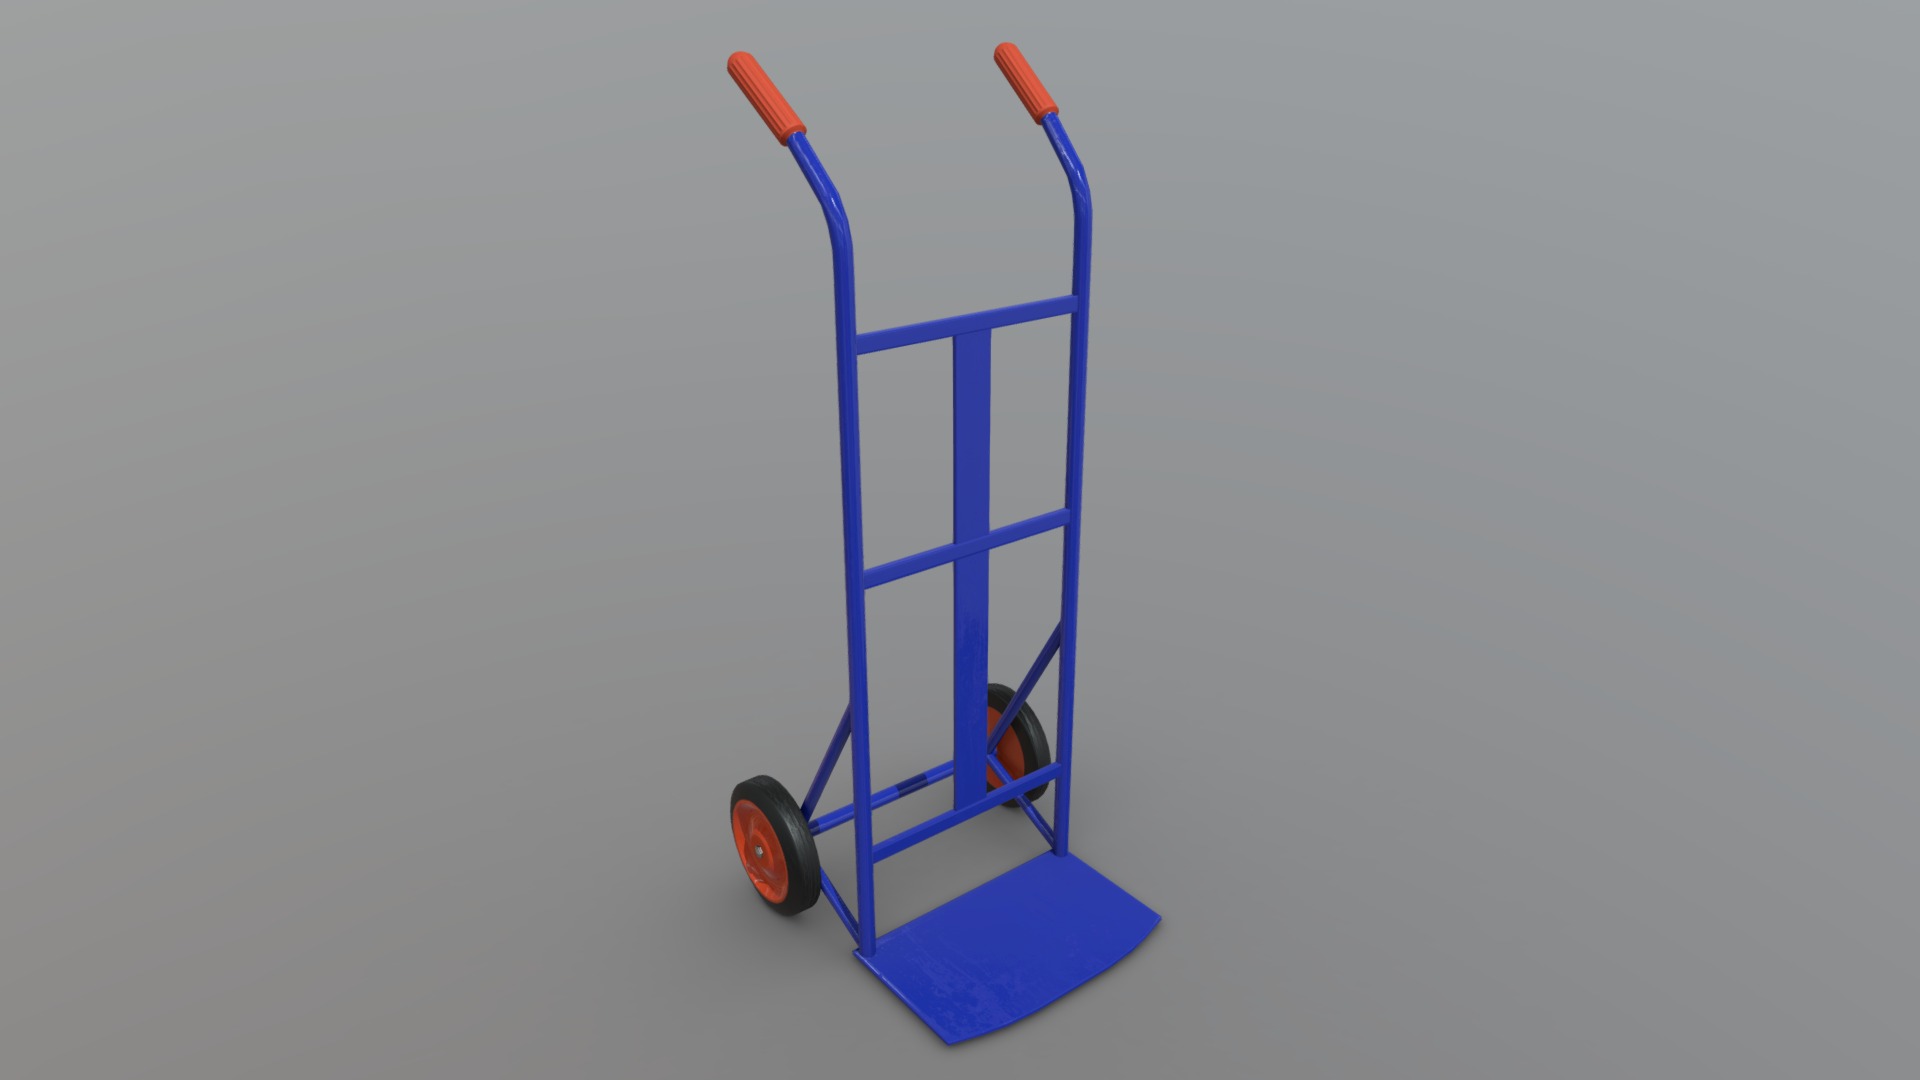 3D model Sack Truck - This is a 3D model of the Sack Truck. The 3D model is about a blue shopping cart.